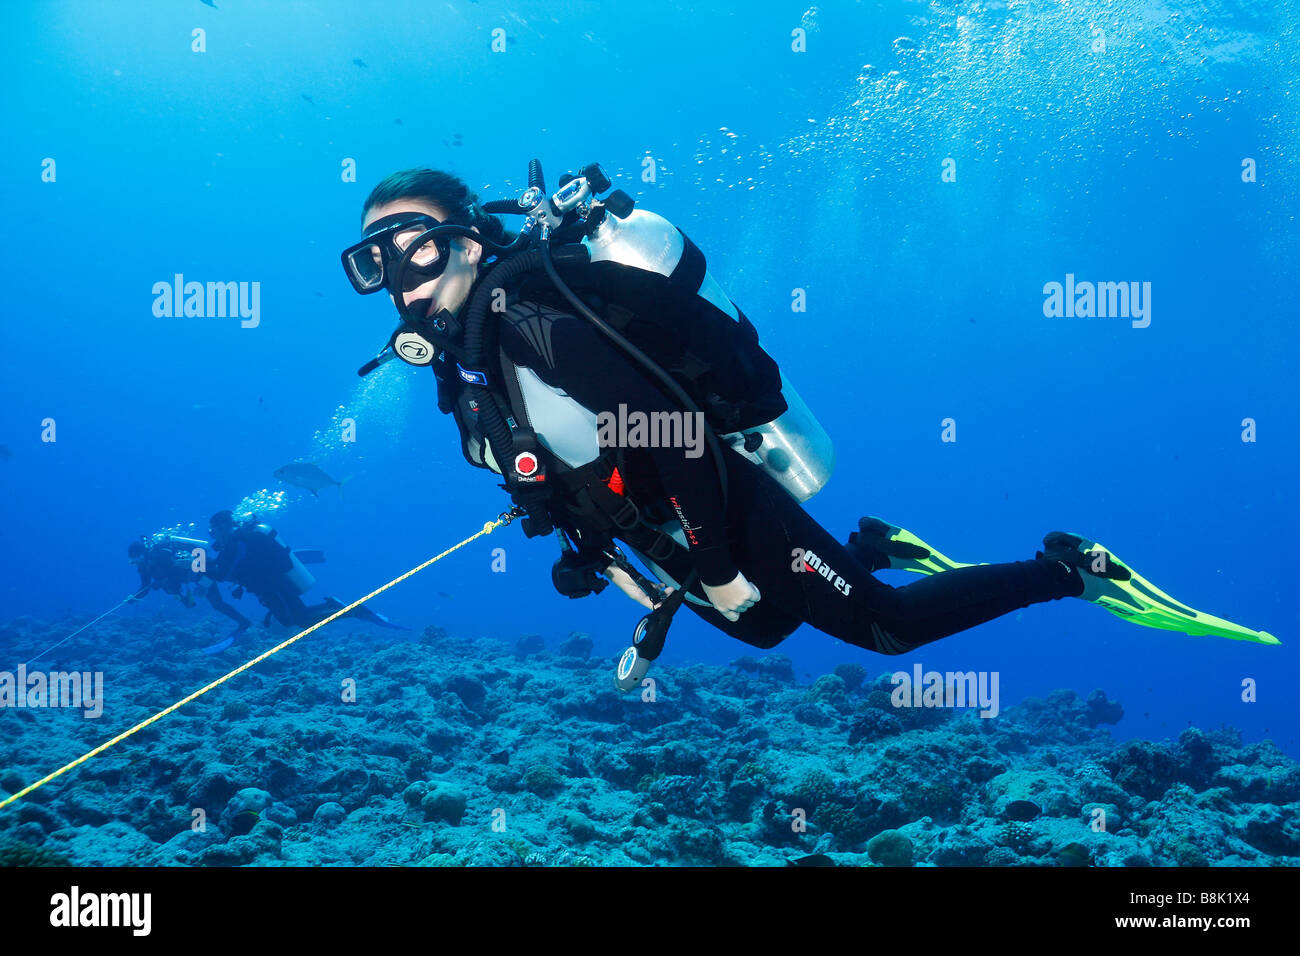 A young female scuba diver tethered to rocky bottom using reef hook in strong ocean current, with other divers in background Stock Photo